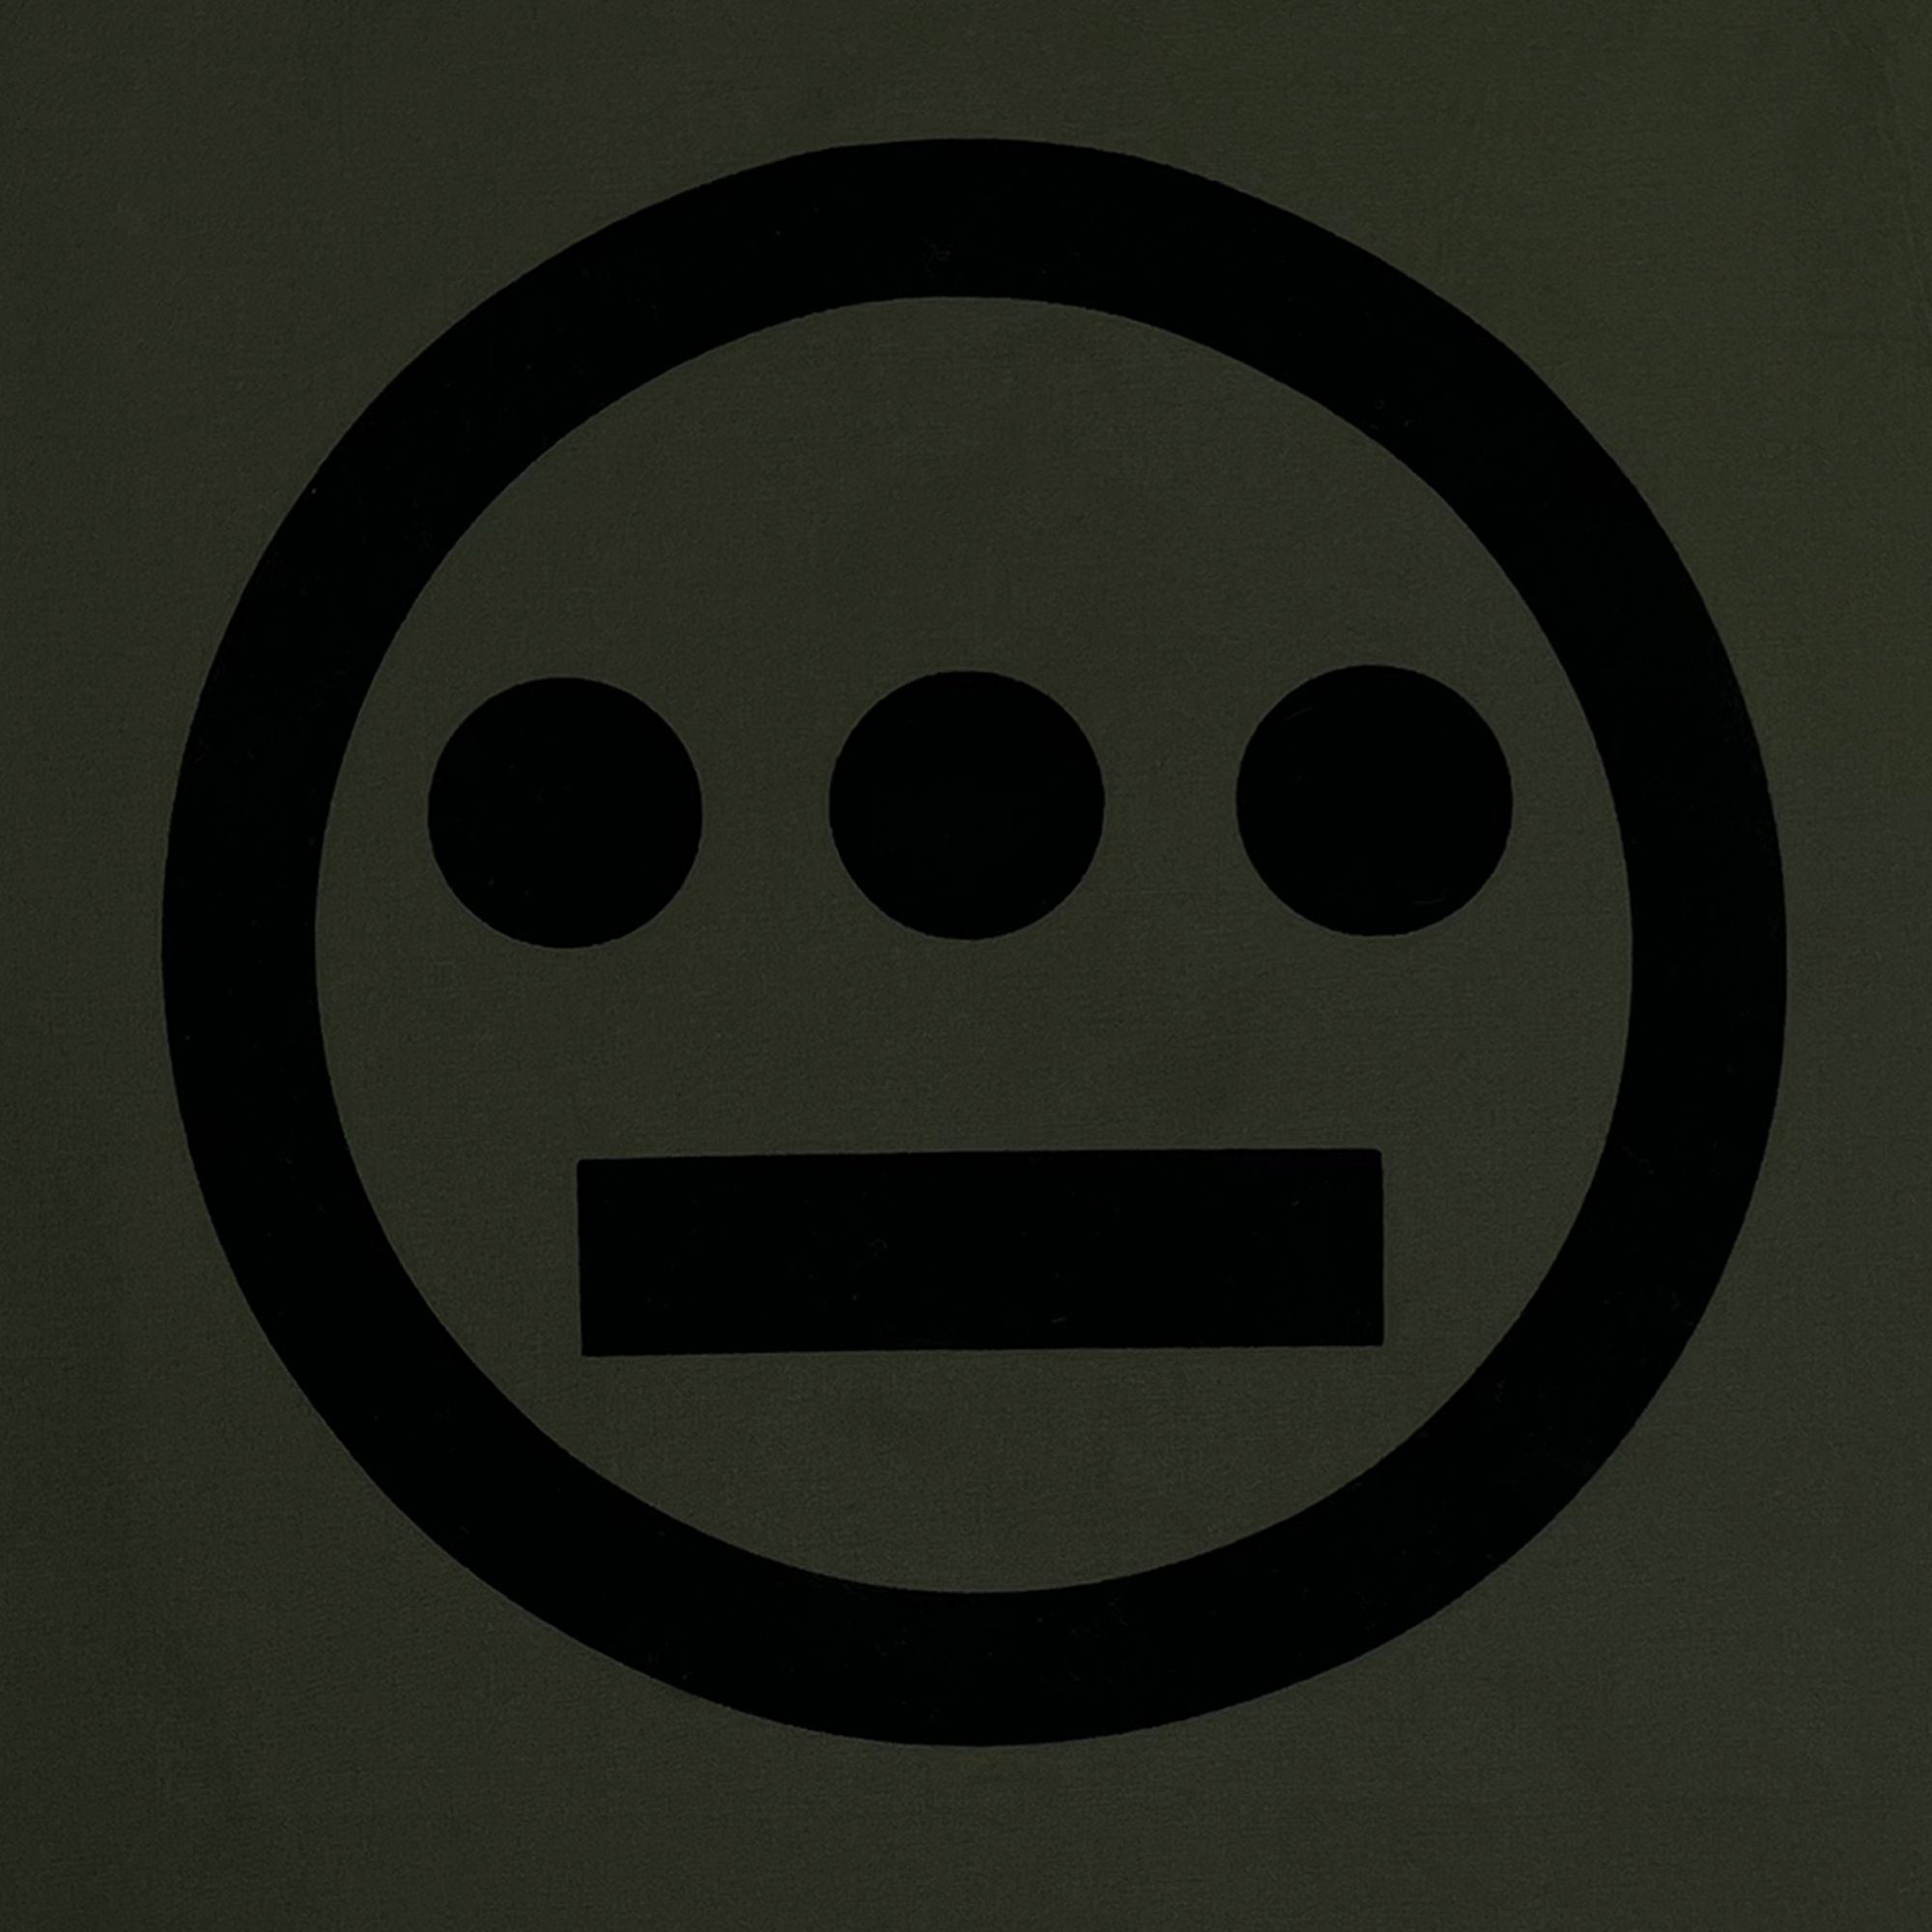 Close up of Hiero logo printed in black ink on backside of an Olive coaches jacket.